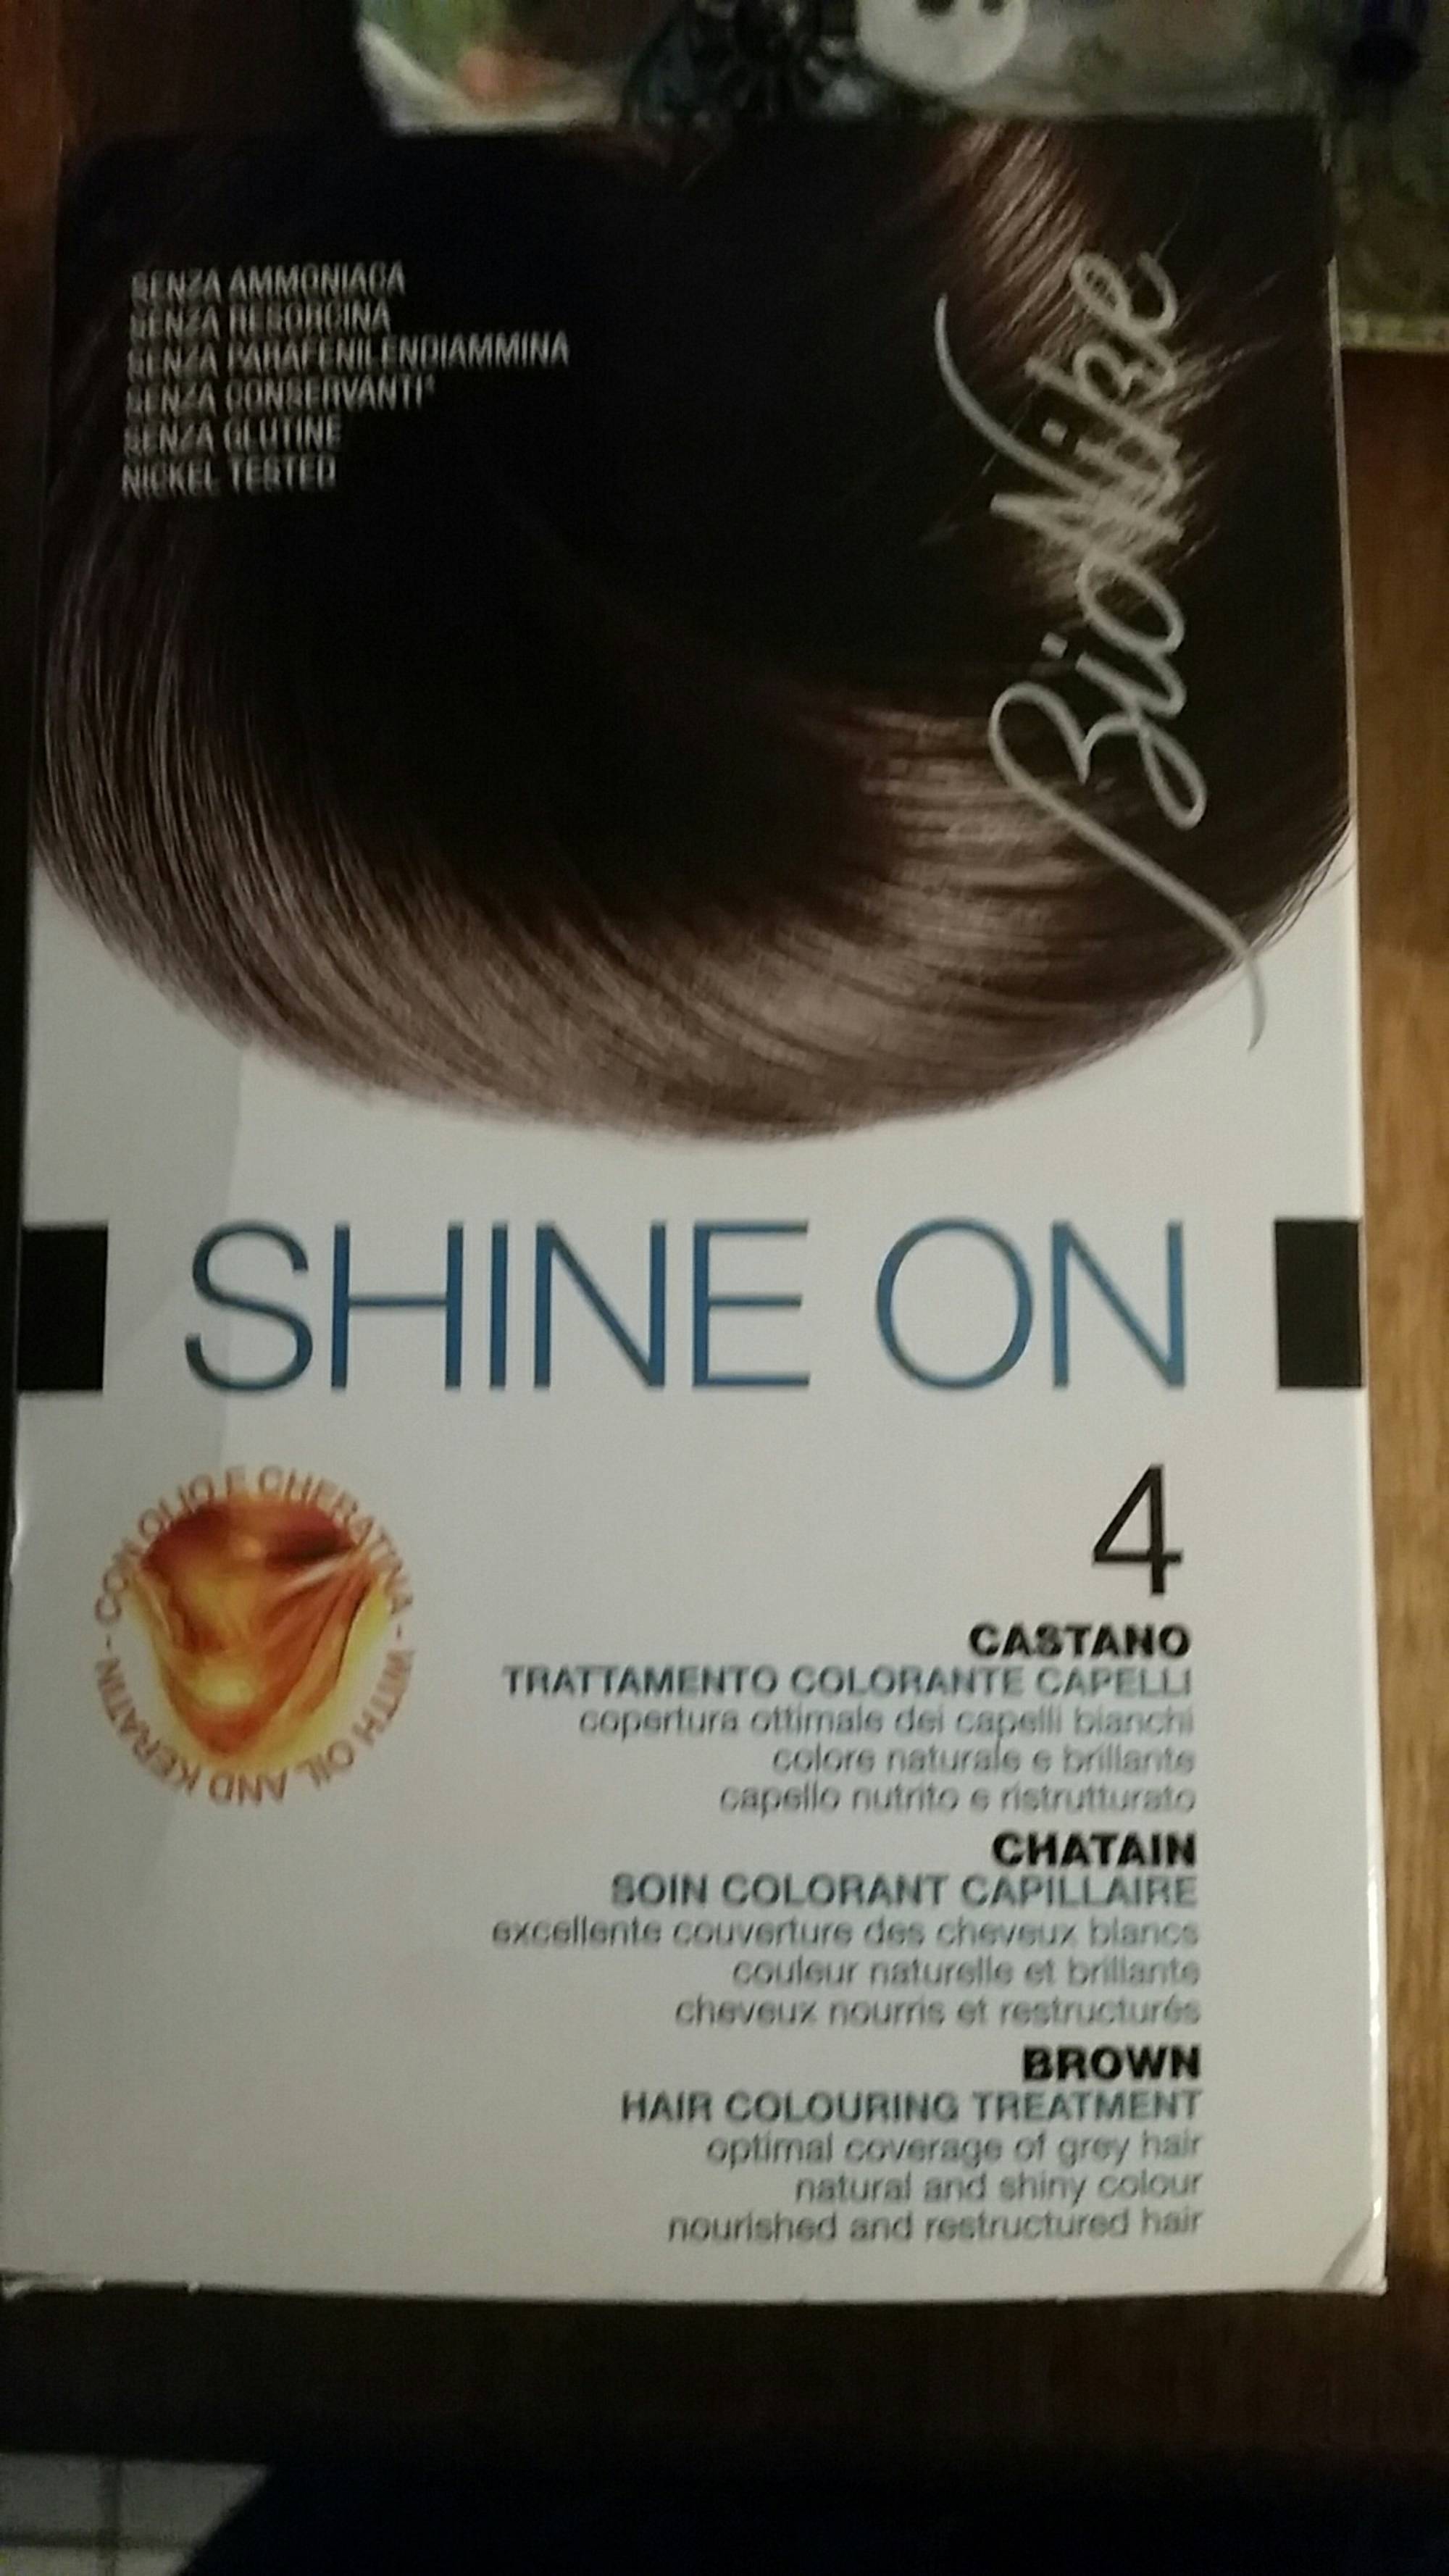 BIONIKE - Shine on - Soin colorant capillaire 4 chatain